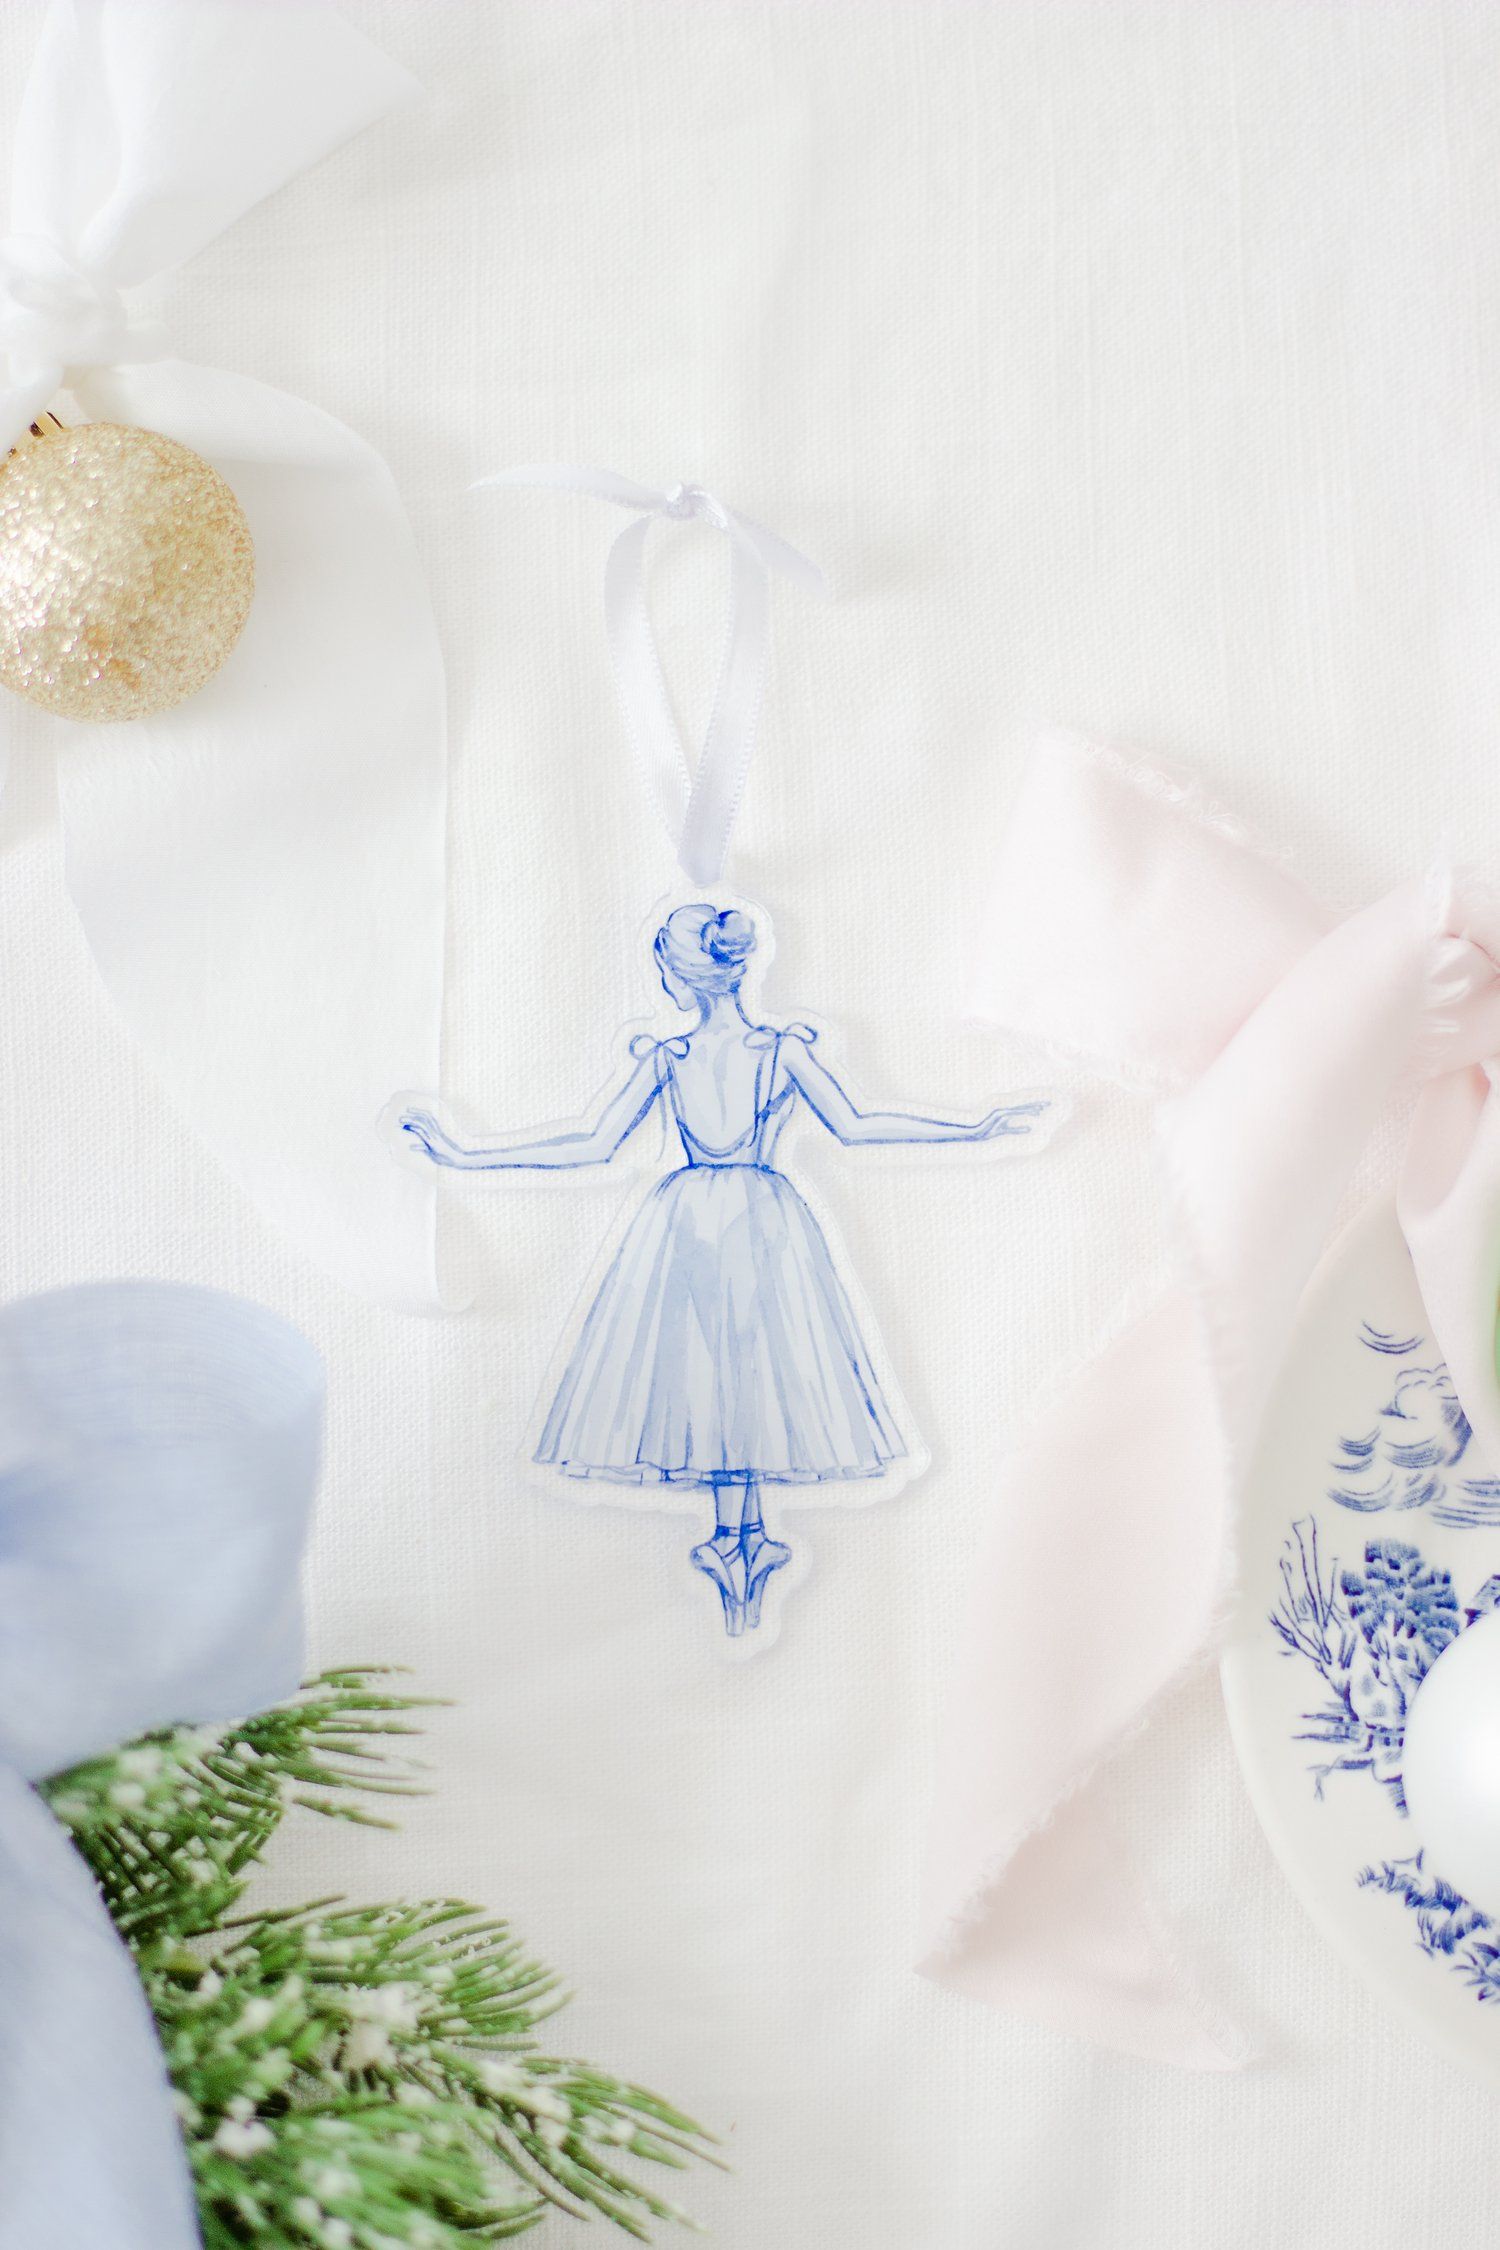 Blue and White Ballerina en Pointe Watercolor Ornament — Simply Jessica Marie | Simply Jessica Marie